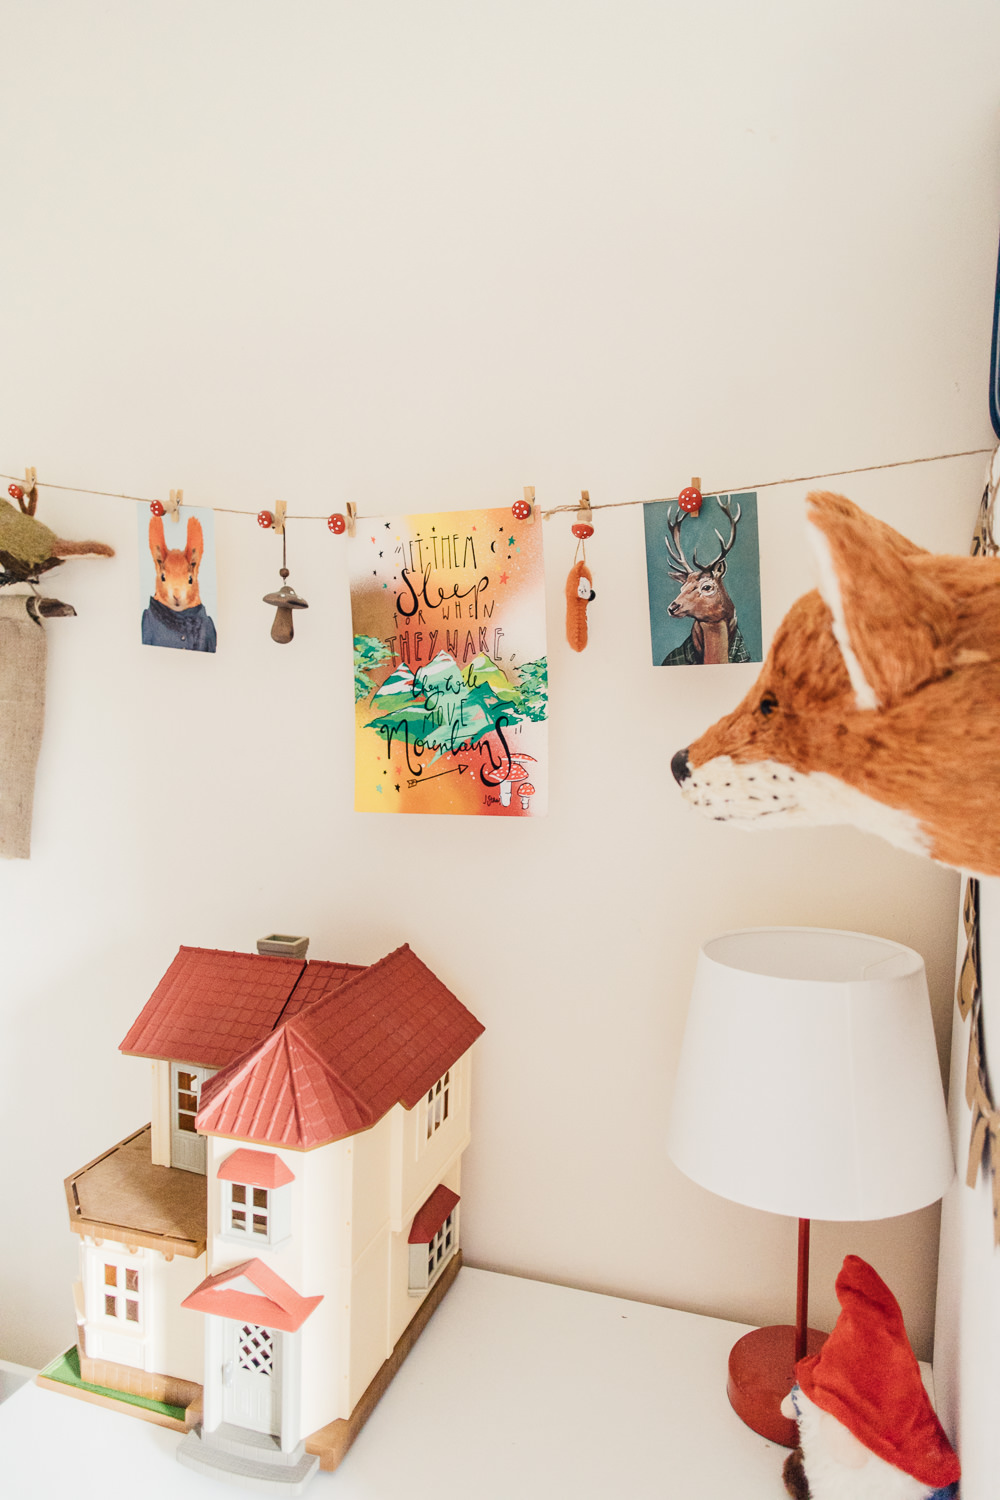 Picture Gallery | Cute gallery wall in a woodland inspired bedroom in a rented property with homemade decor and details.